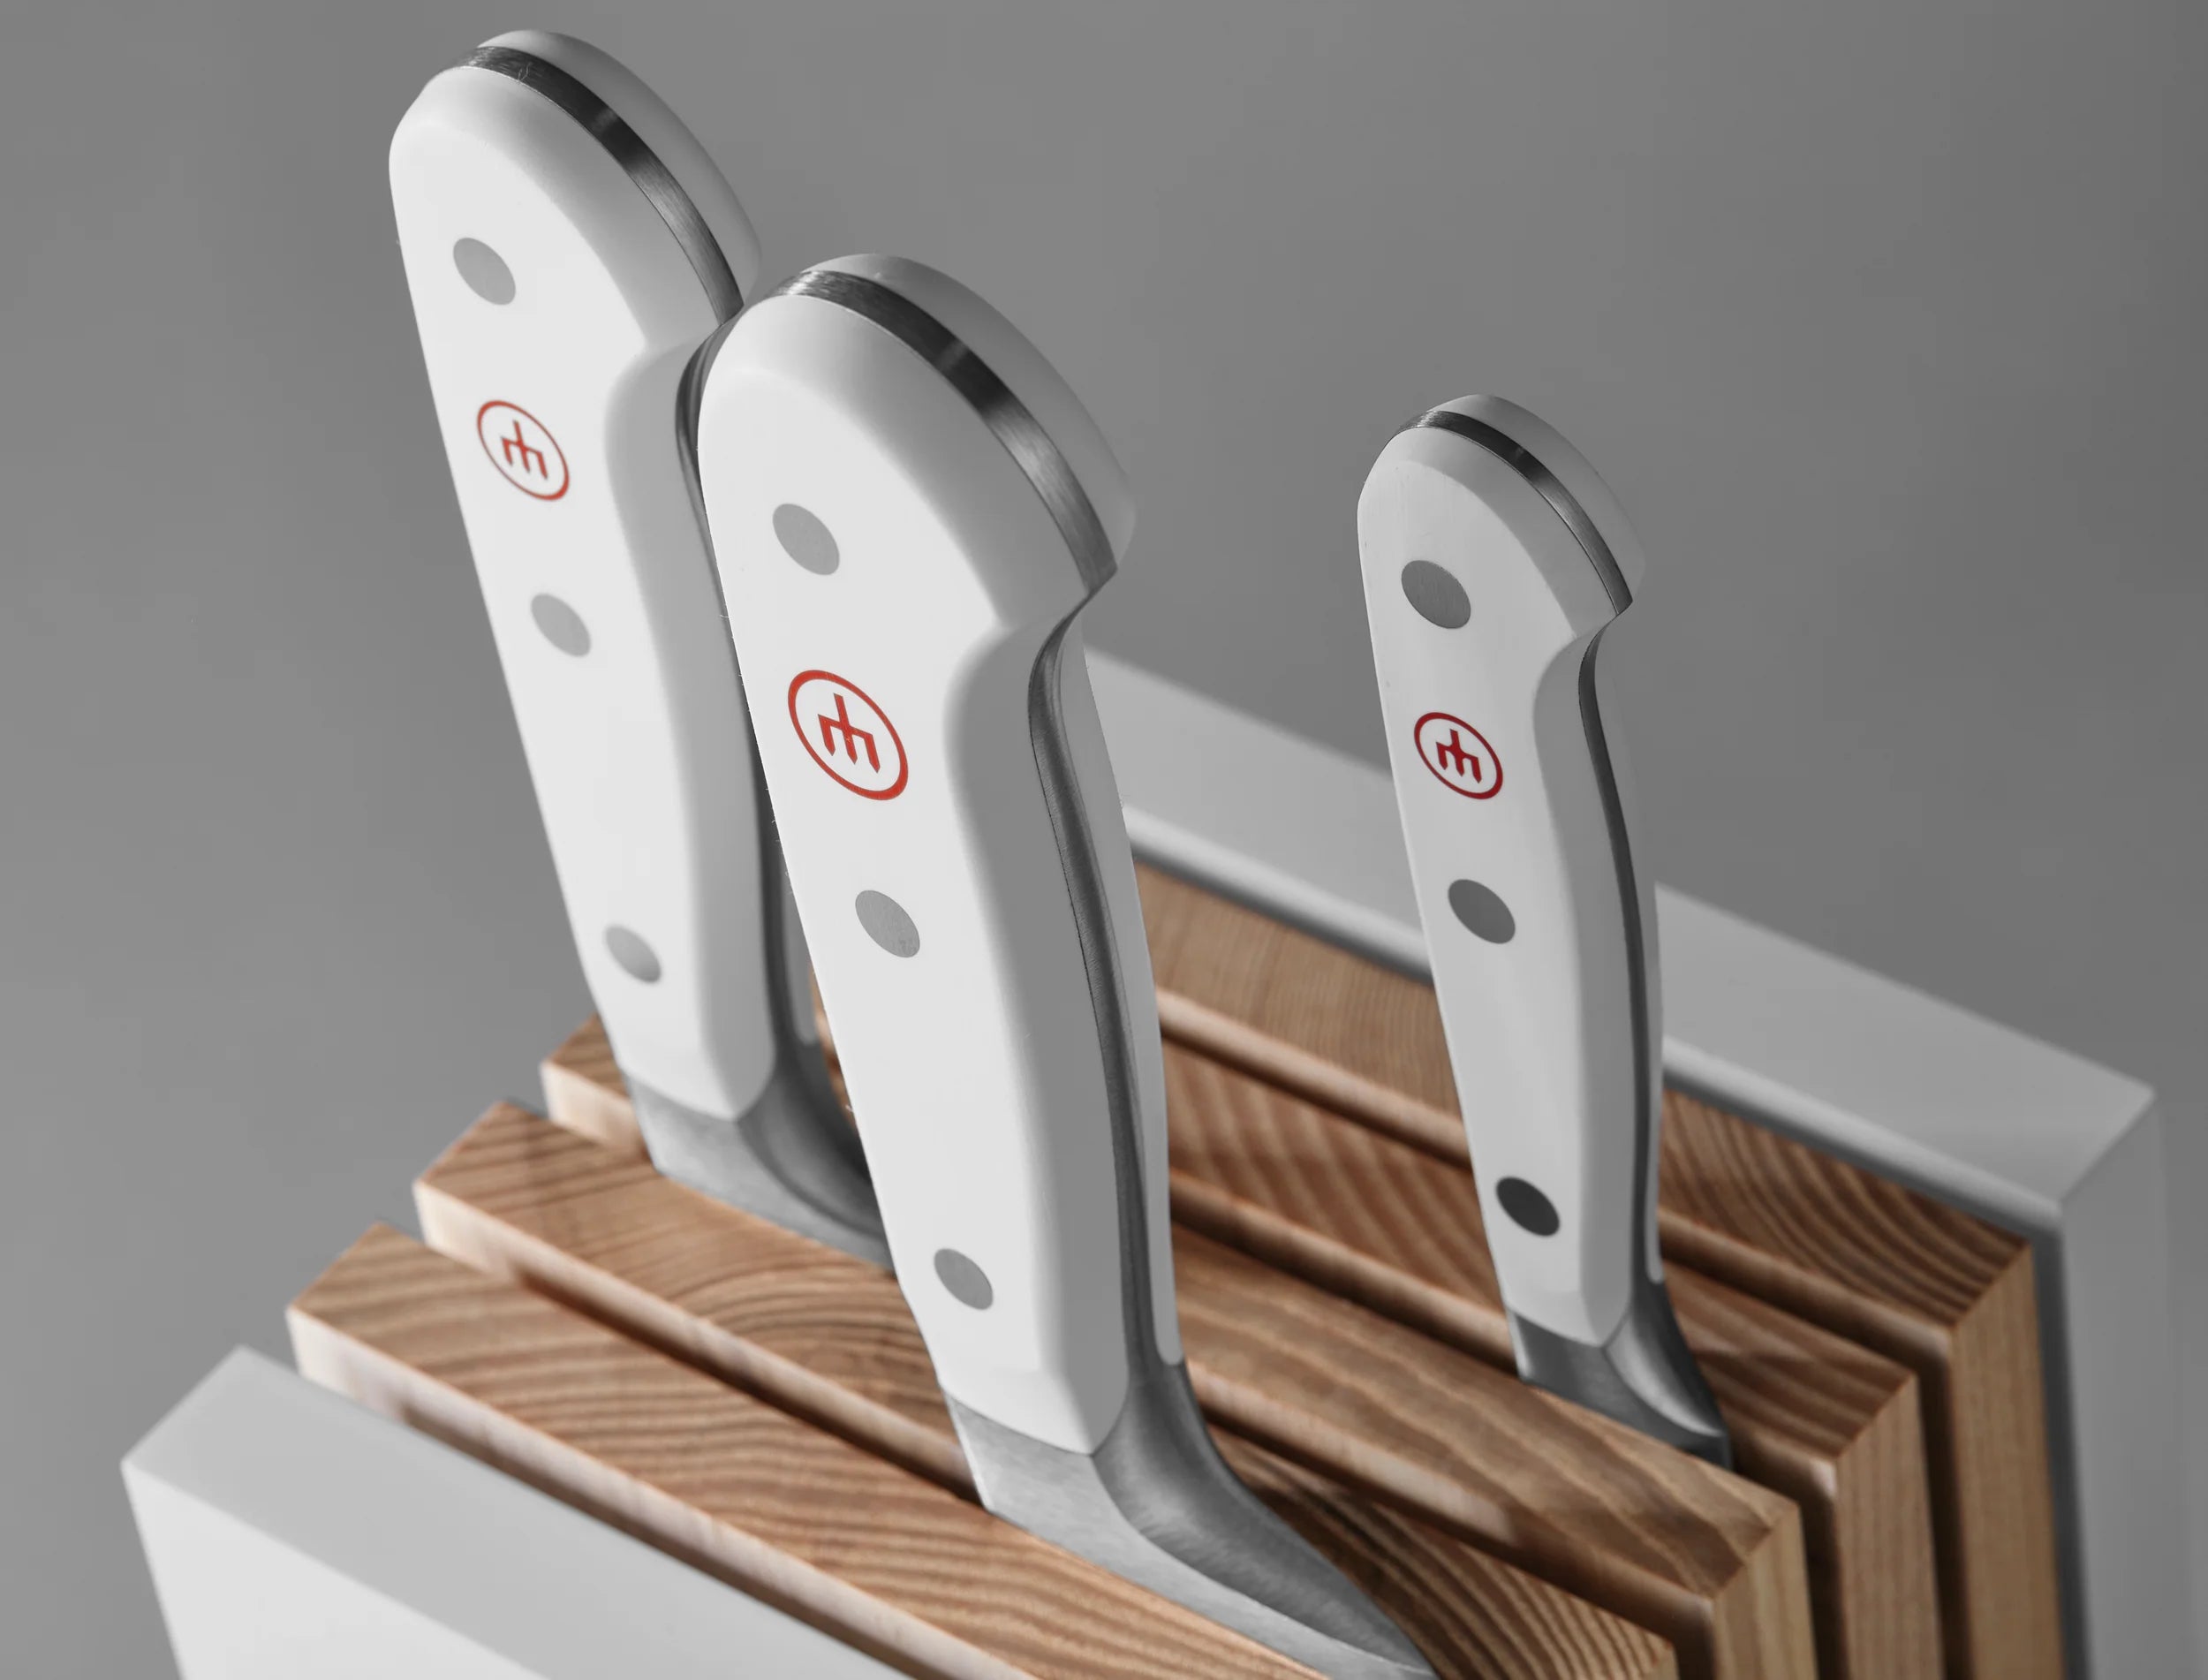 Wusthof Classic White 6-piece Knife Block Set with Bread Knife